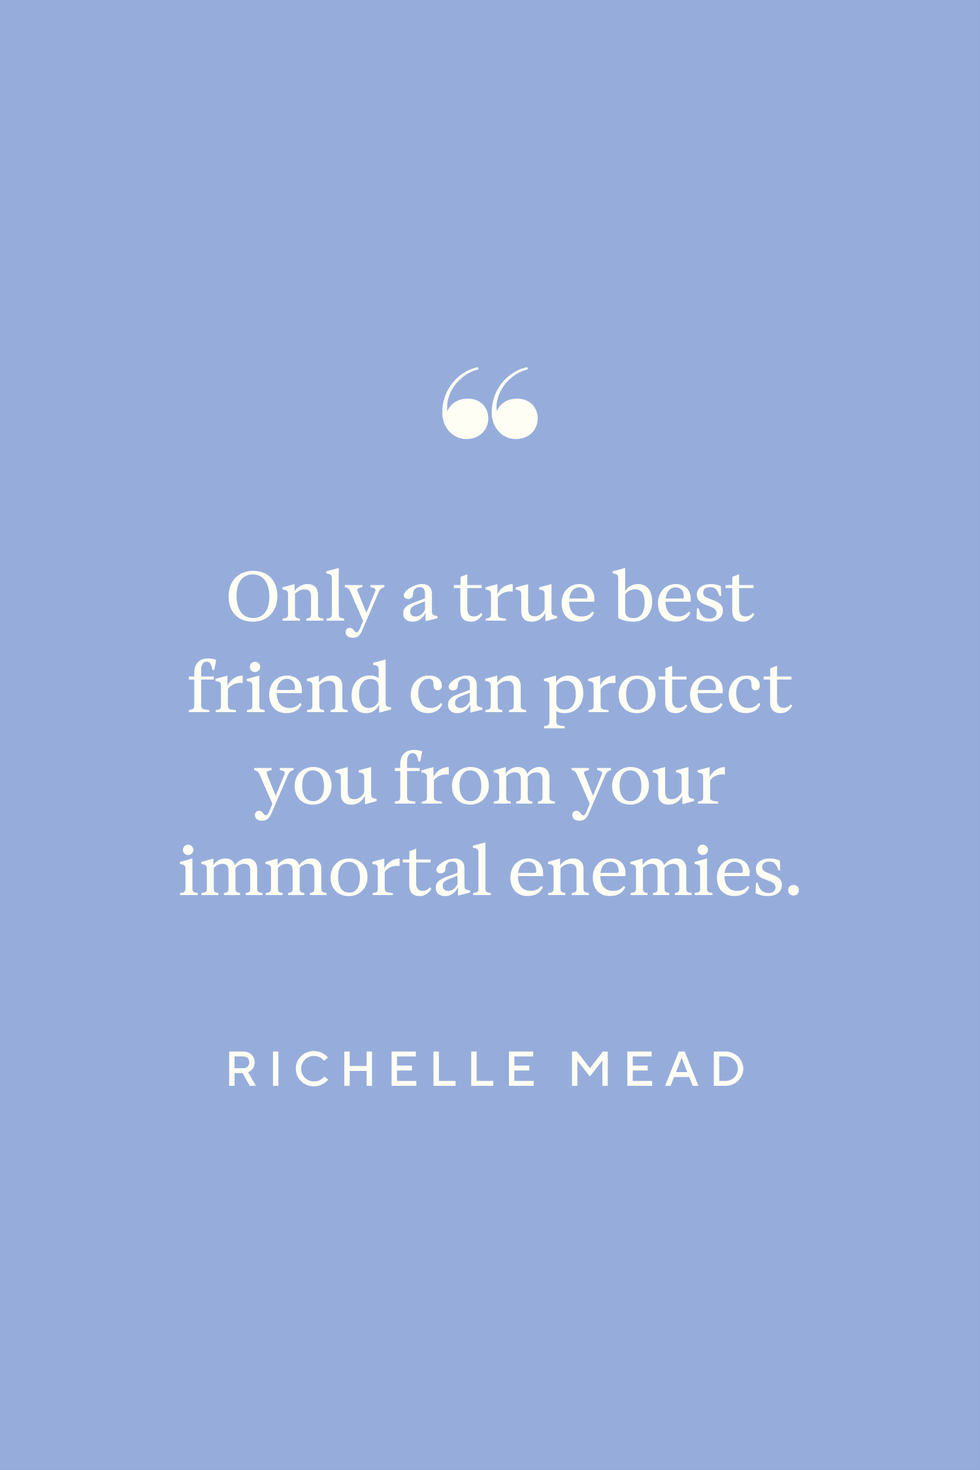 40 Friendship Quotes for Your Person– Healing Brave